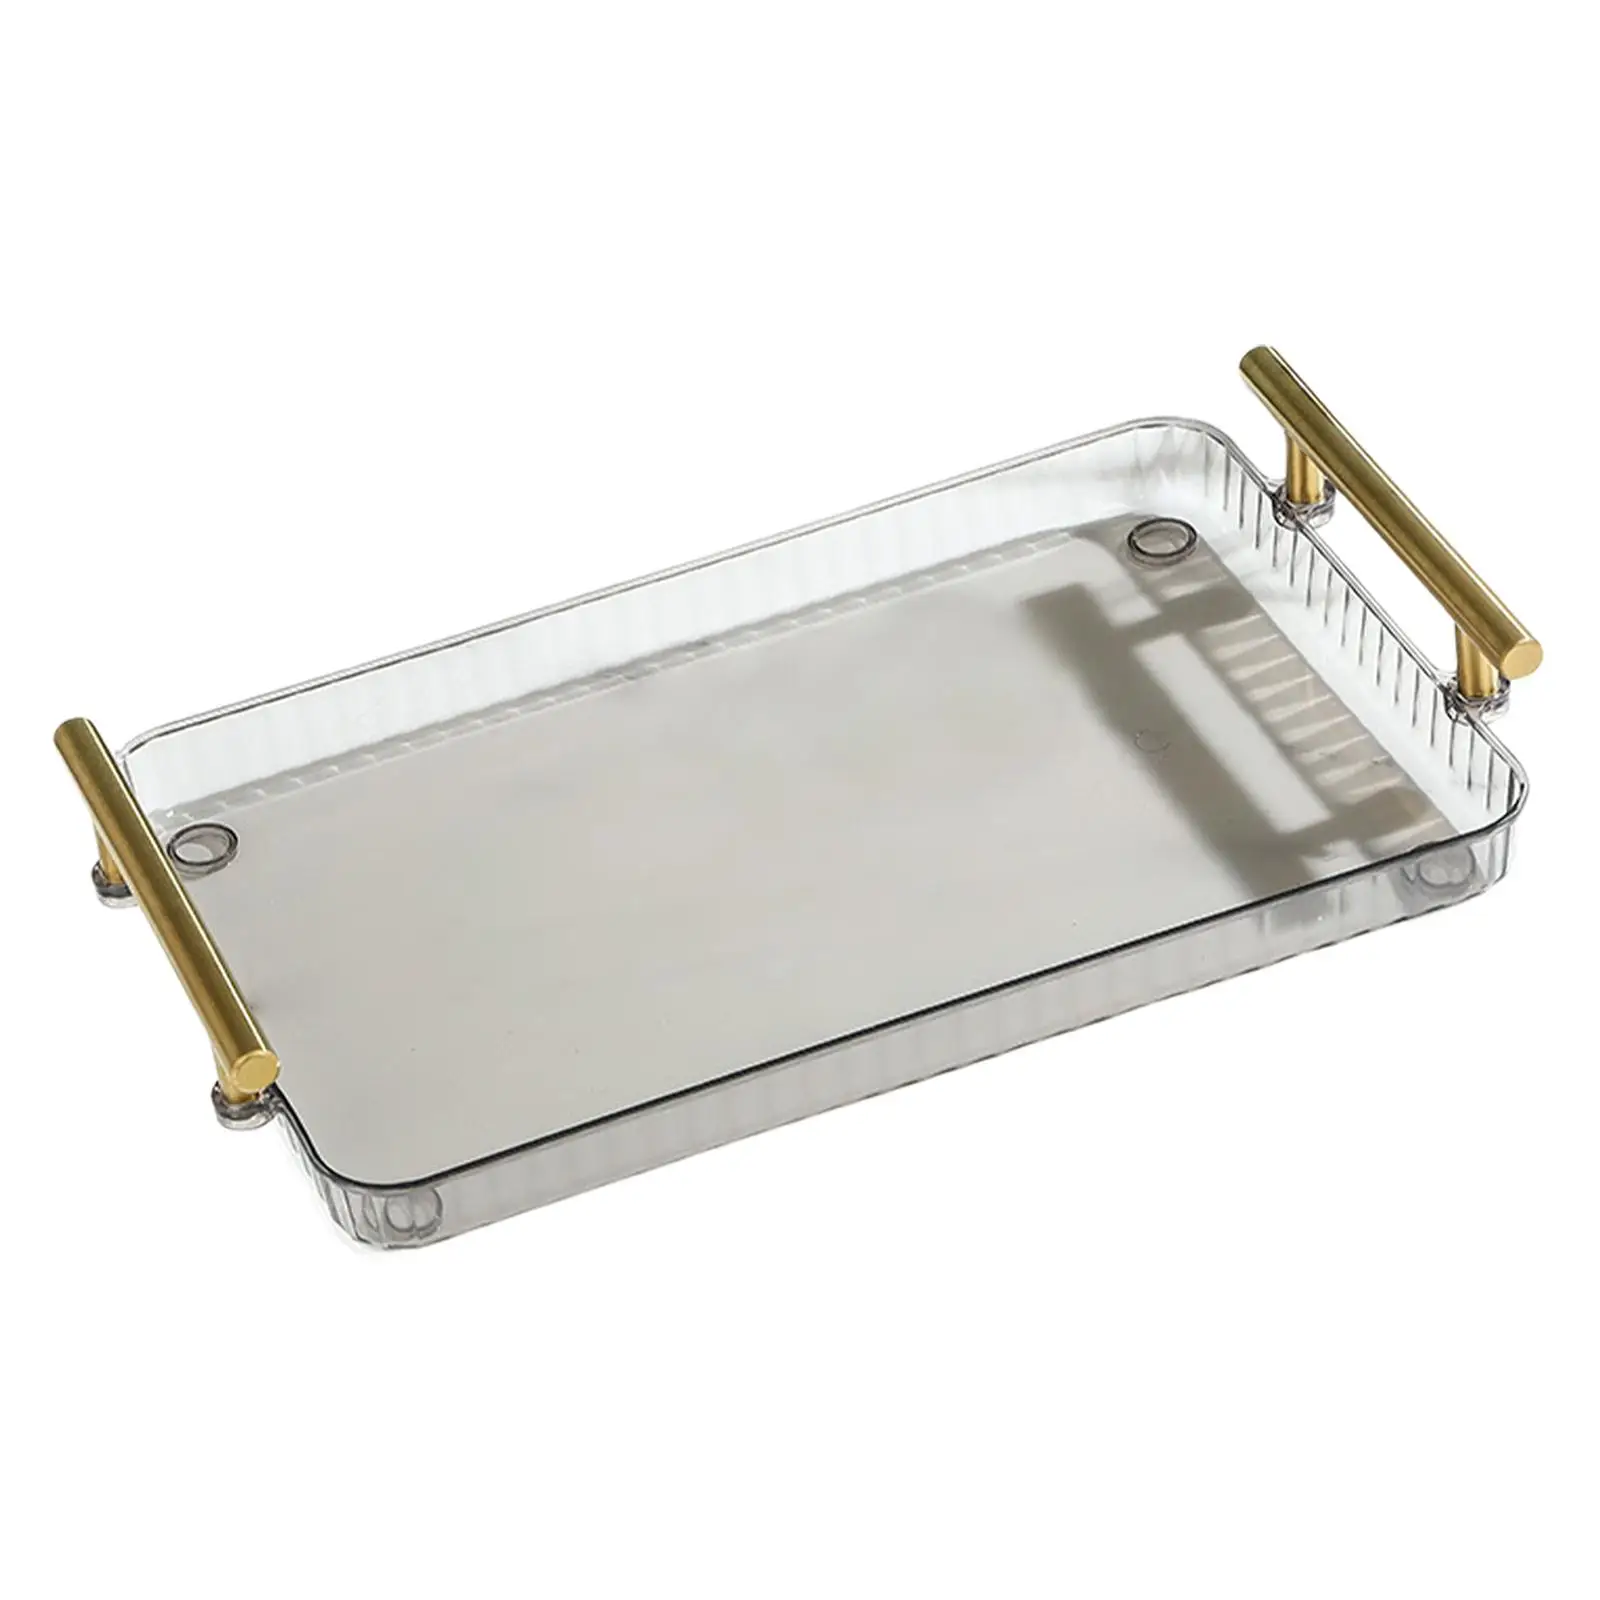 Rectangular Serving Tray Serving Tray with Handles Organizer